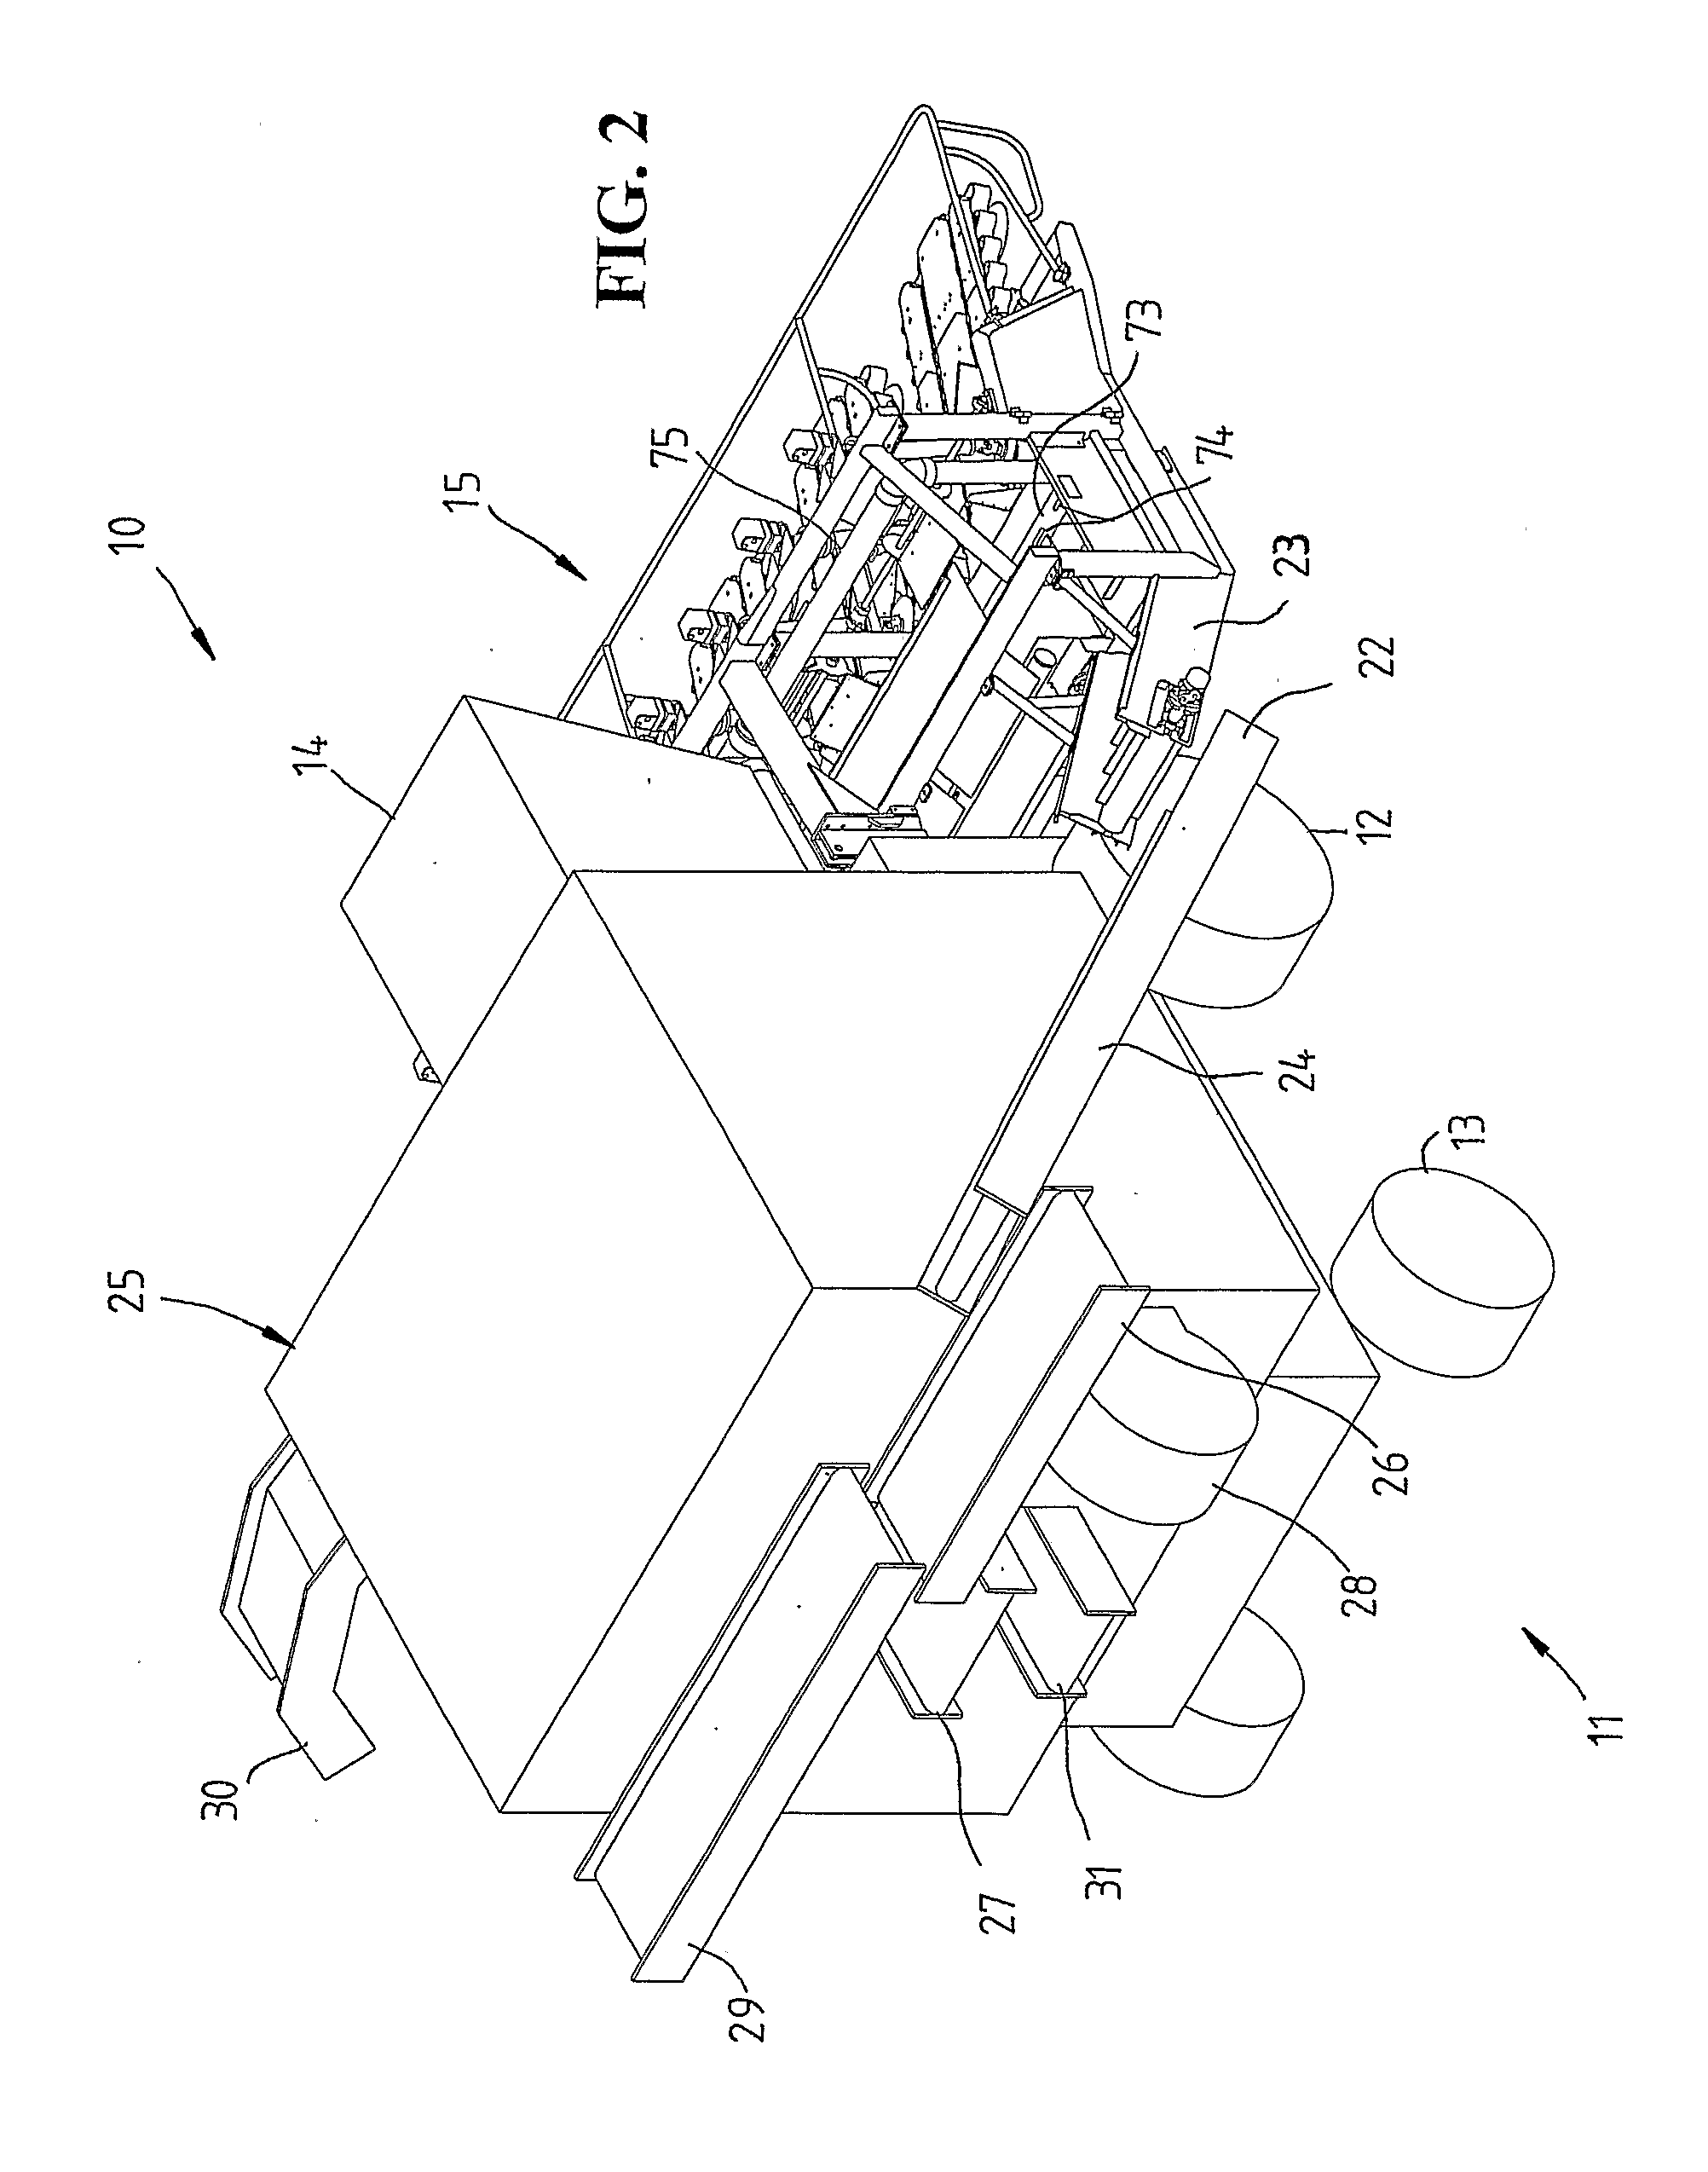 Method and Apparatus for Harvesting Standing Vegetable Crops